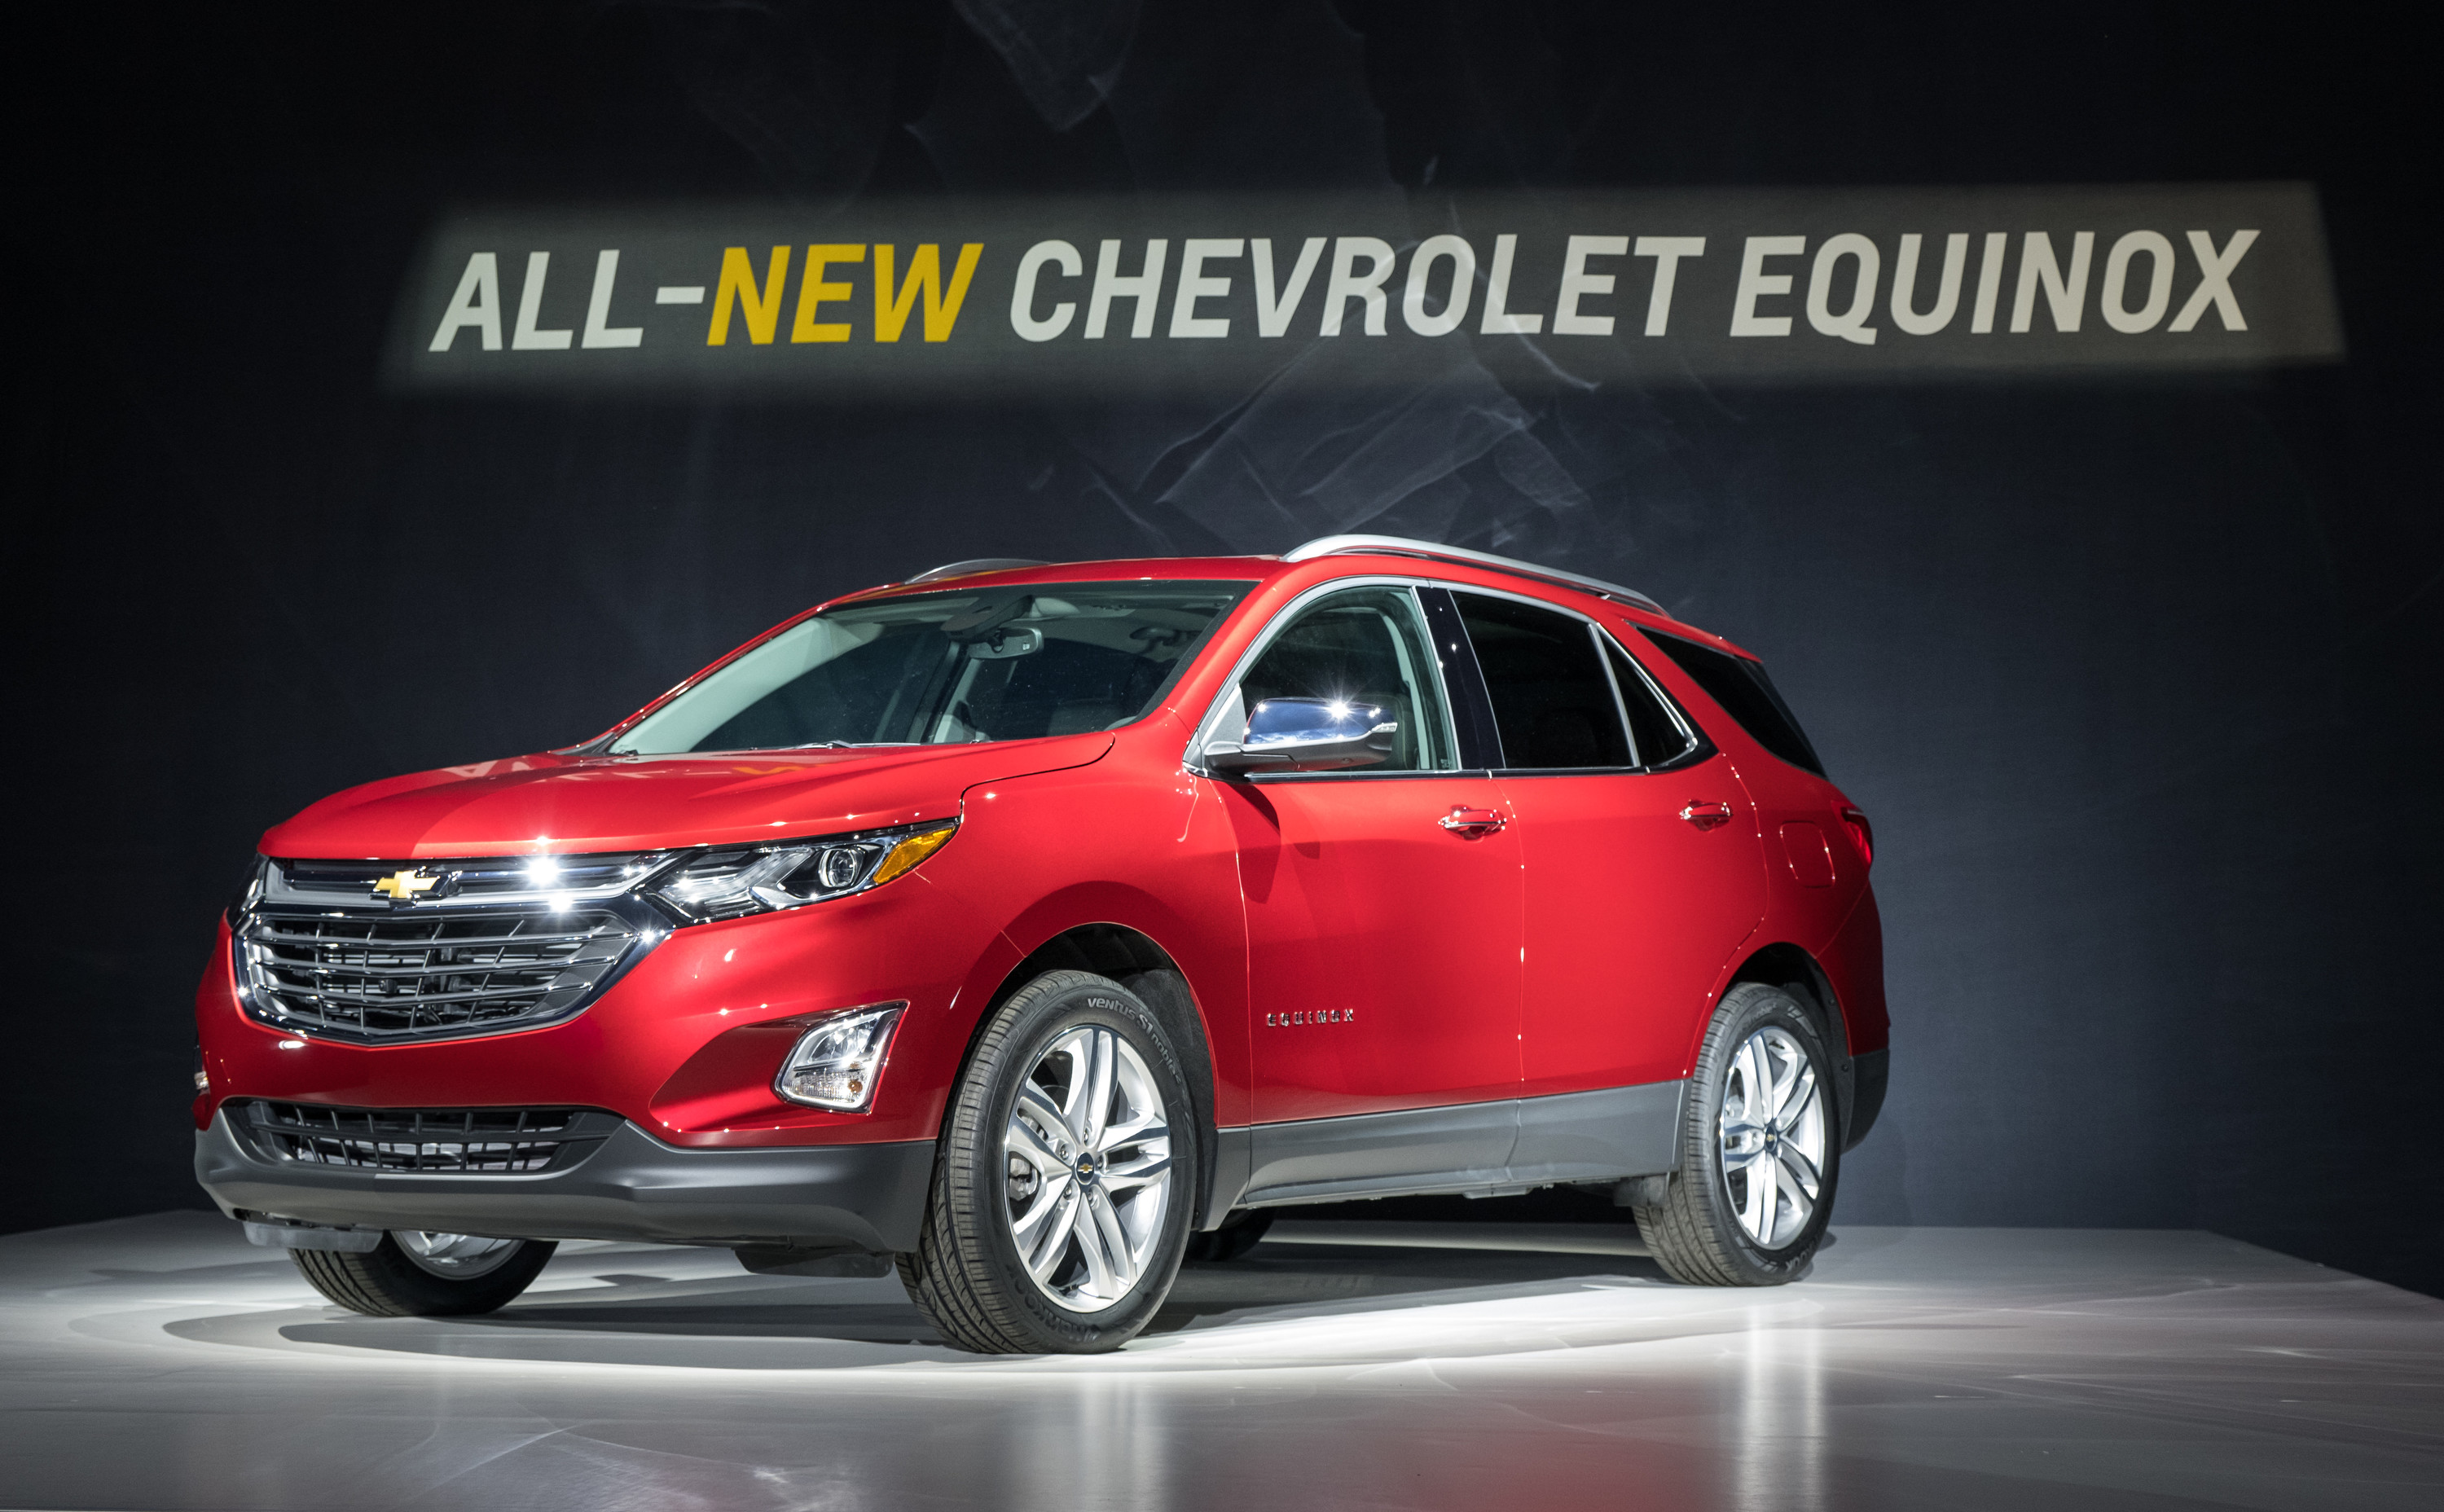 2018 Chevrolet Equinox Unveiled – Lighter, more efficient, and now offering a turbo-diesel (VIDEO)